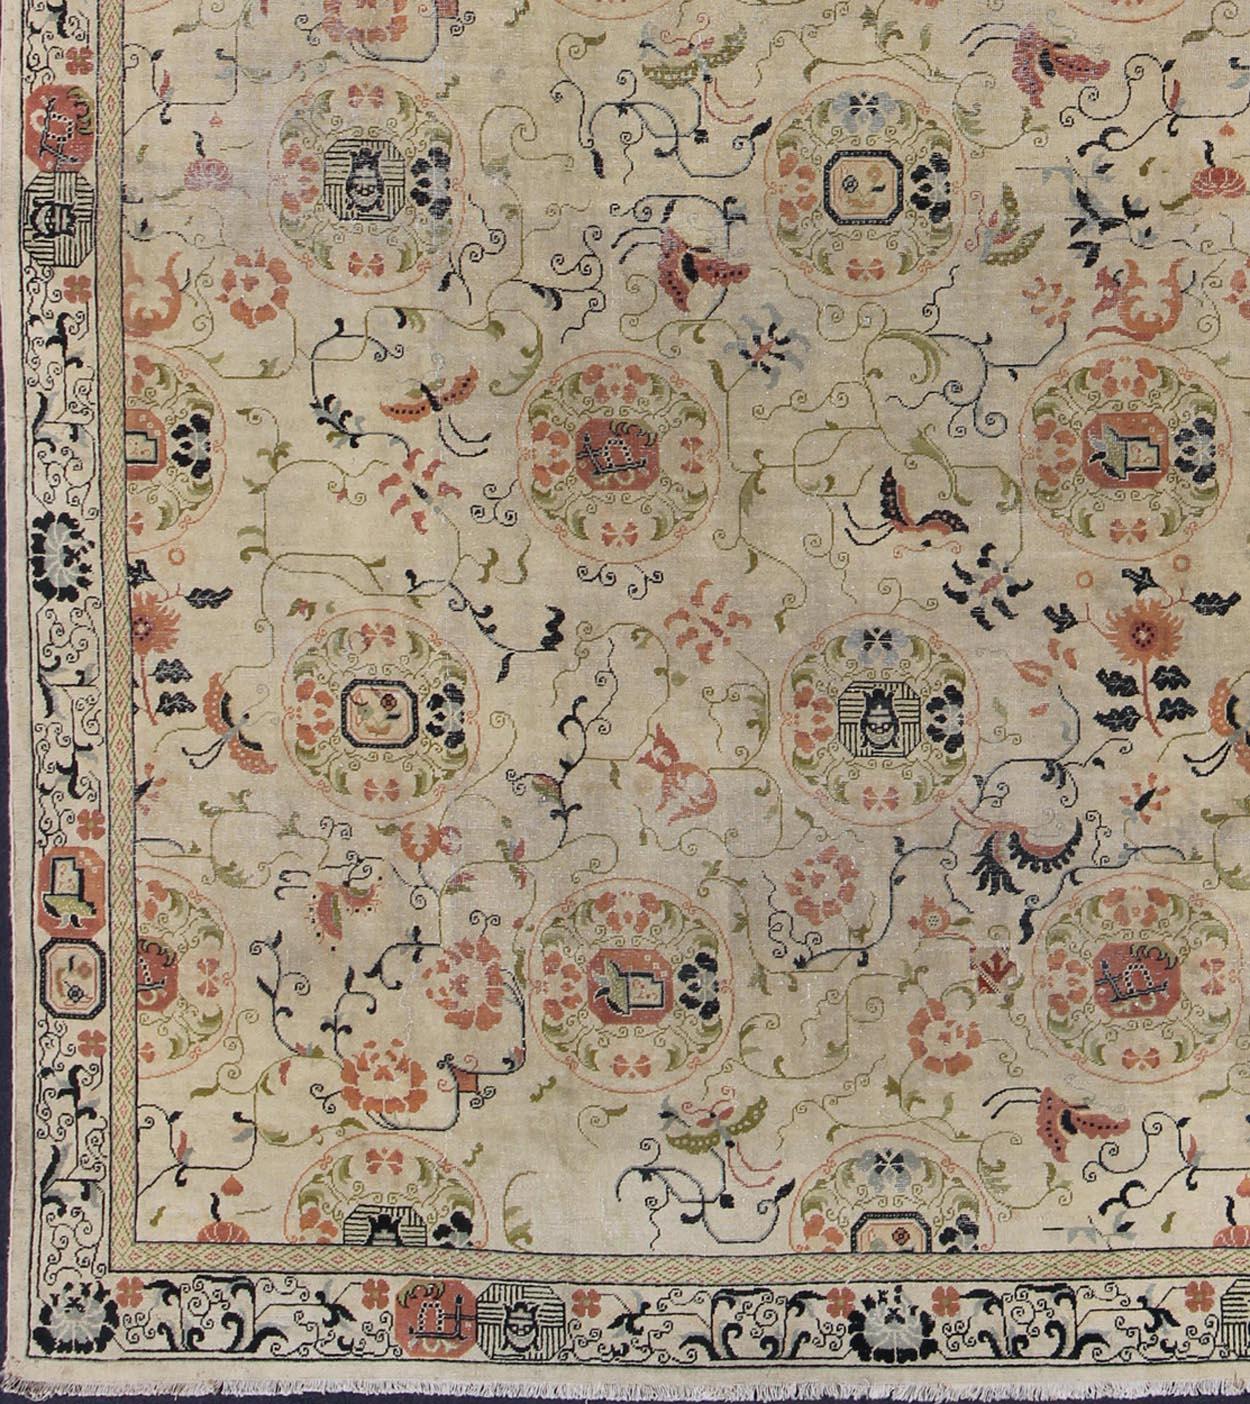 Antique Khotan rug with creamy ivory field and floral design, rug 18-0502, country of origin / type: Turkestan / Khotan, 1930

This attractive antique Khotan rug is a spectacular testament to the complexity of Turkestan design. The creamy ivory